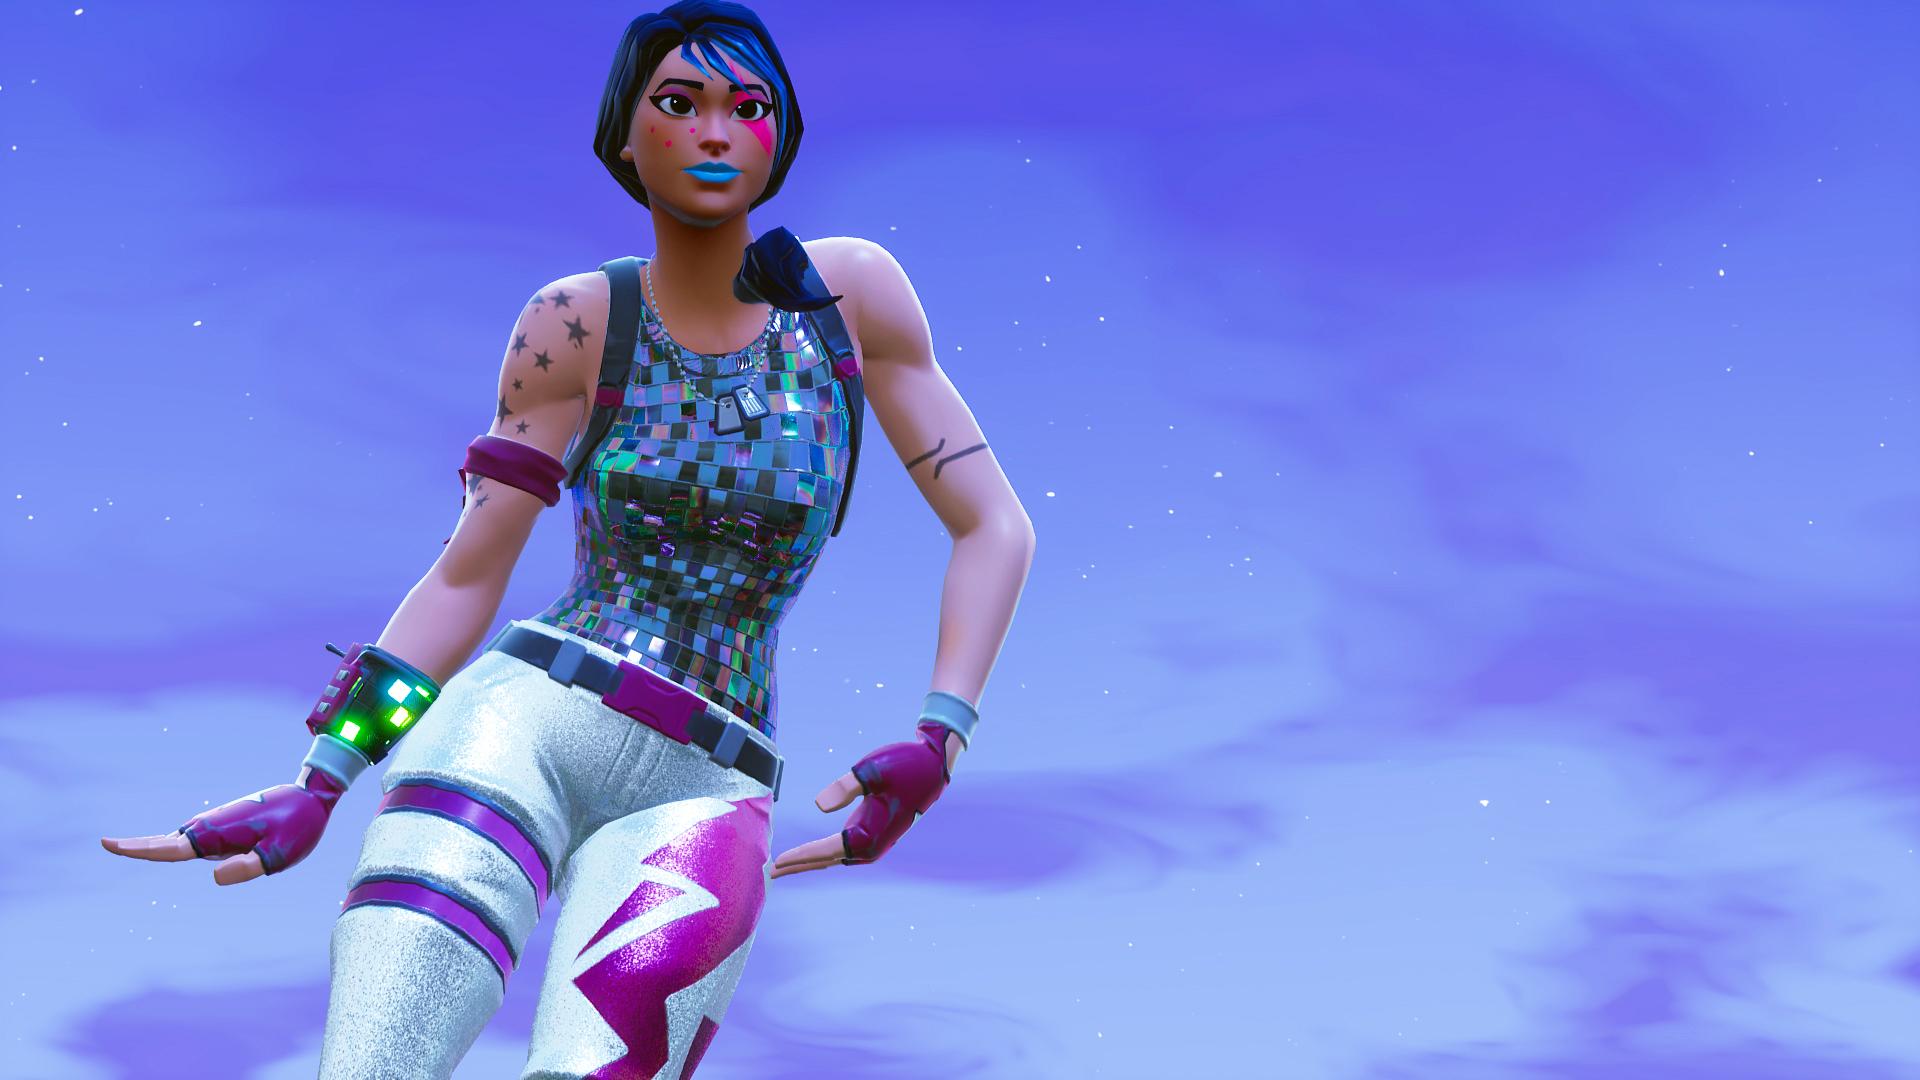 Sparkle Specialist Fortnitephotography